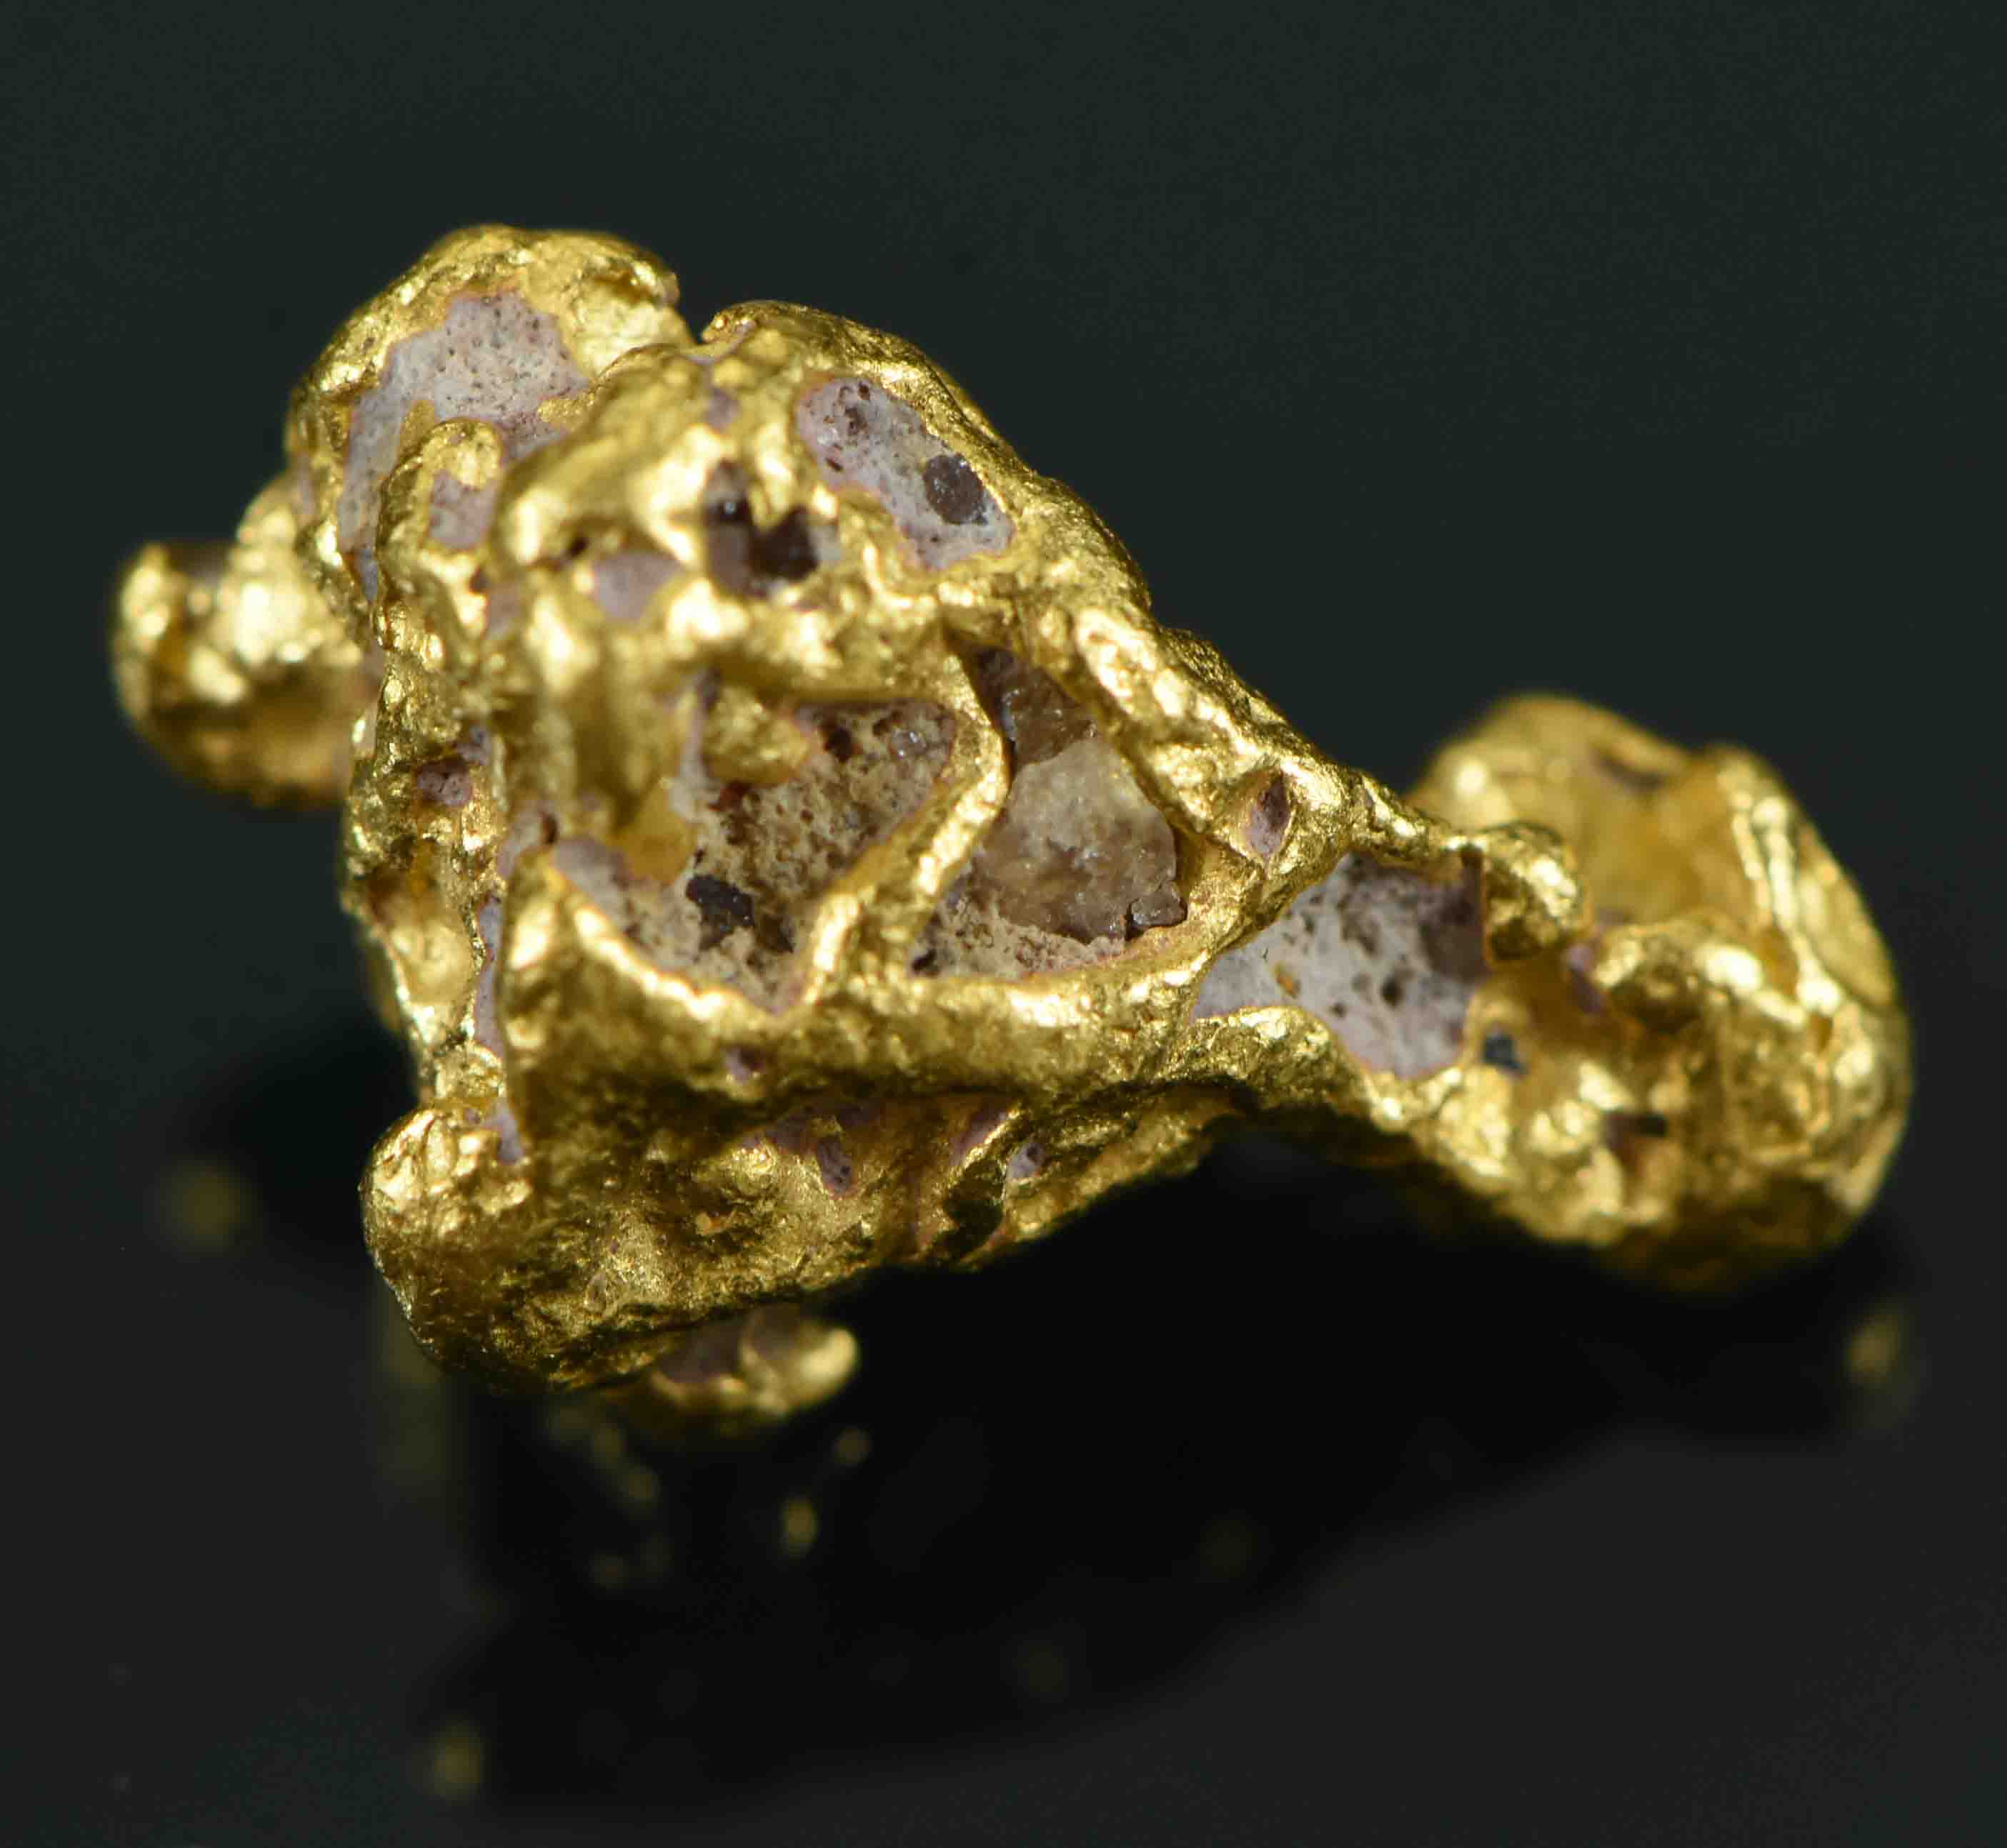 #25 Australian Natural Gold Nugget With Quartz Weighs 2.38 Grams.